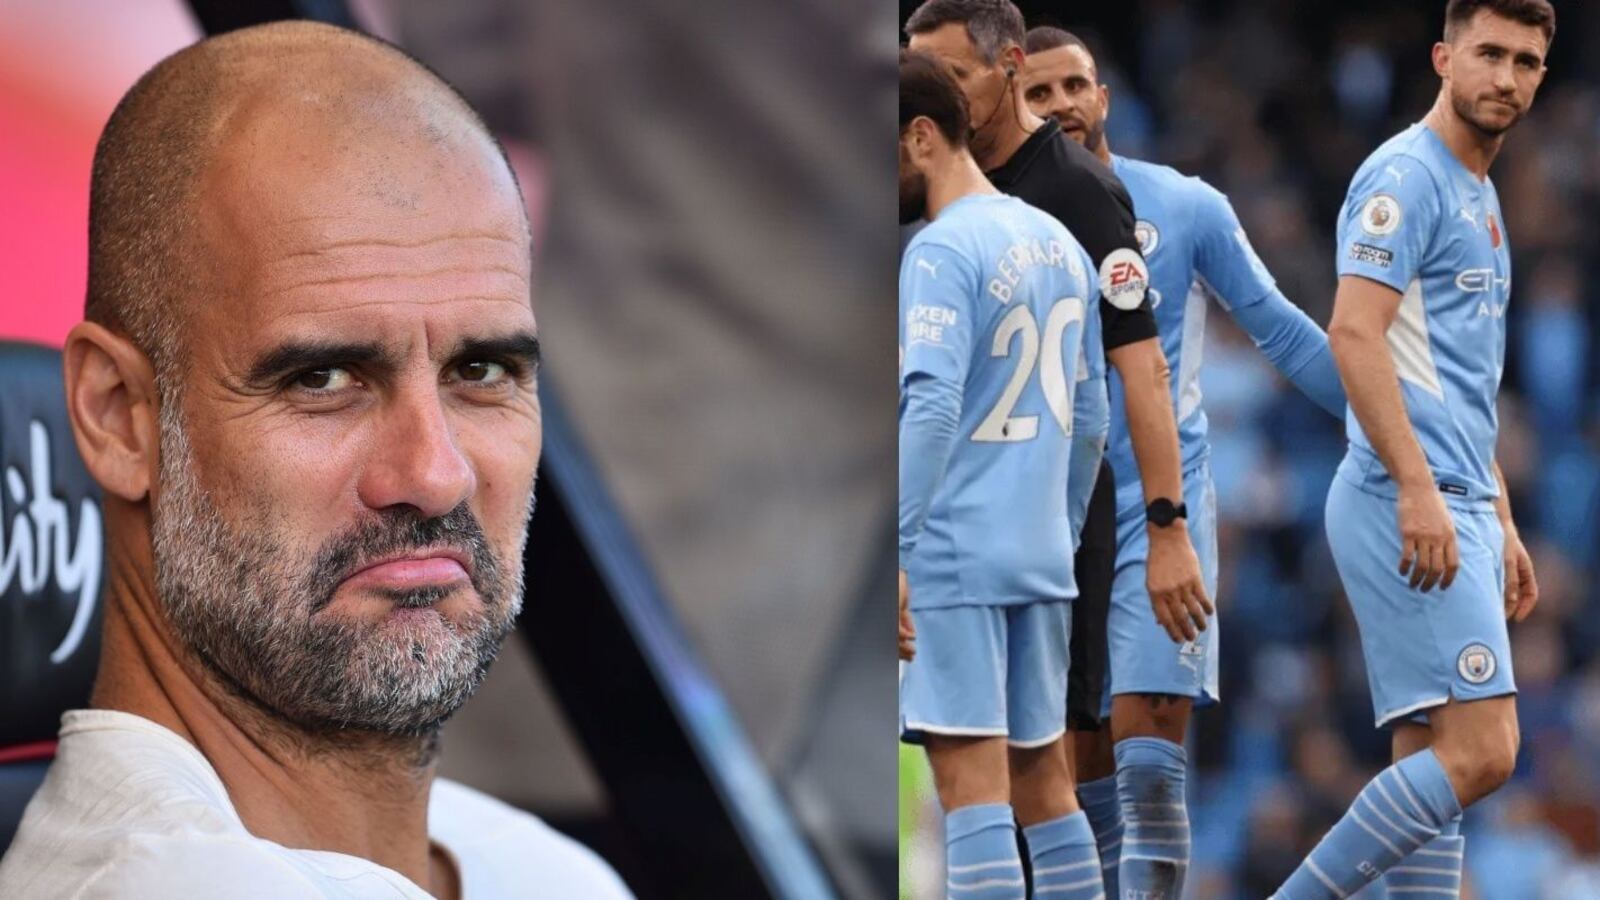 Bye Manchester City, the player who got tired of Guardiola and asked to leave the club